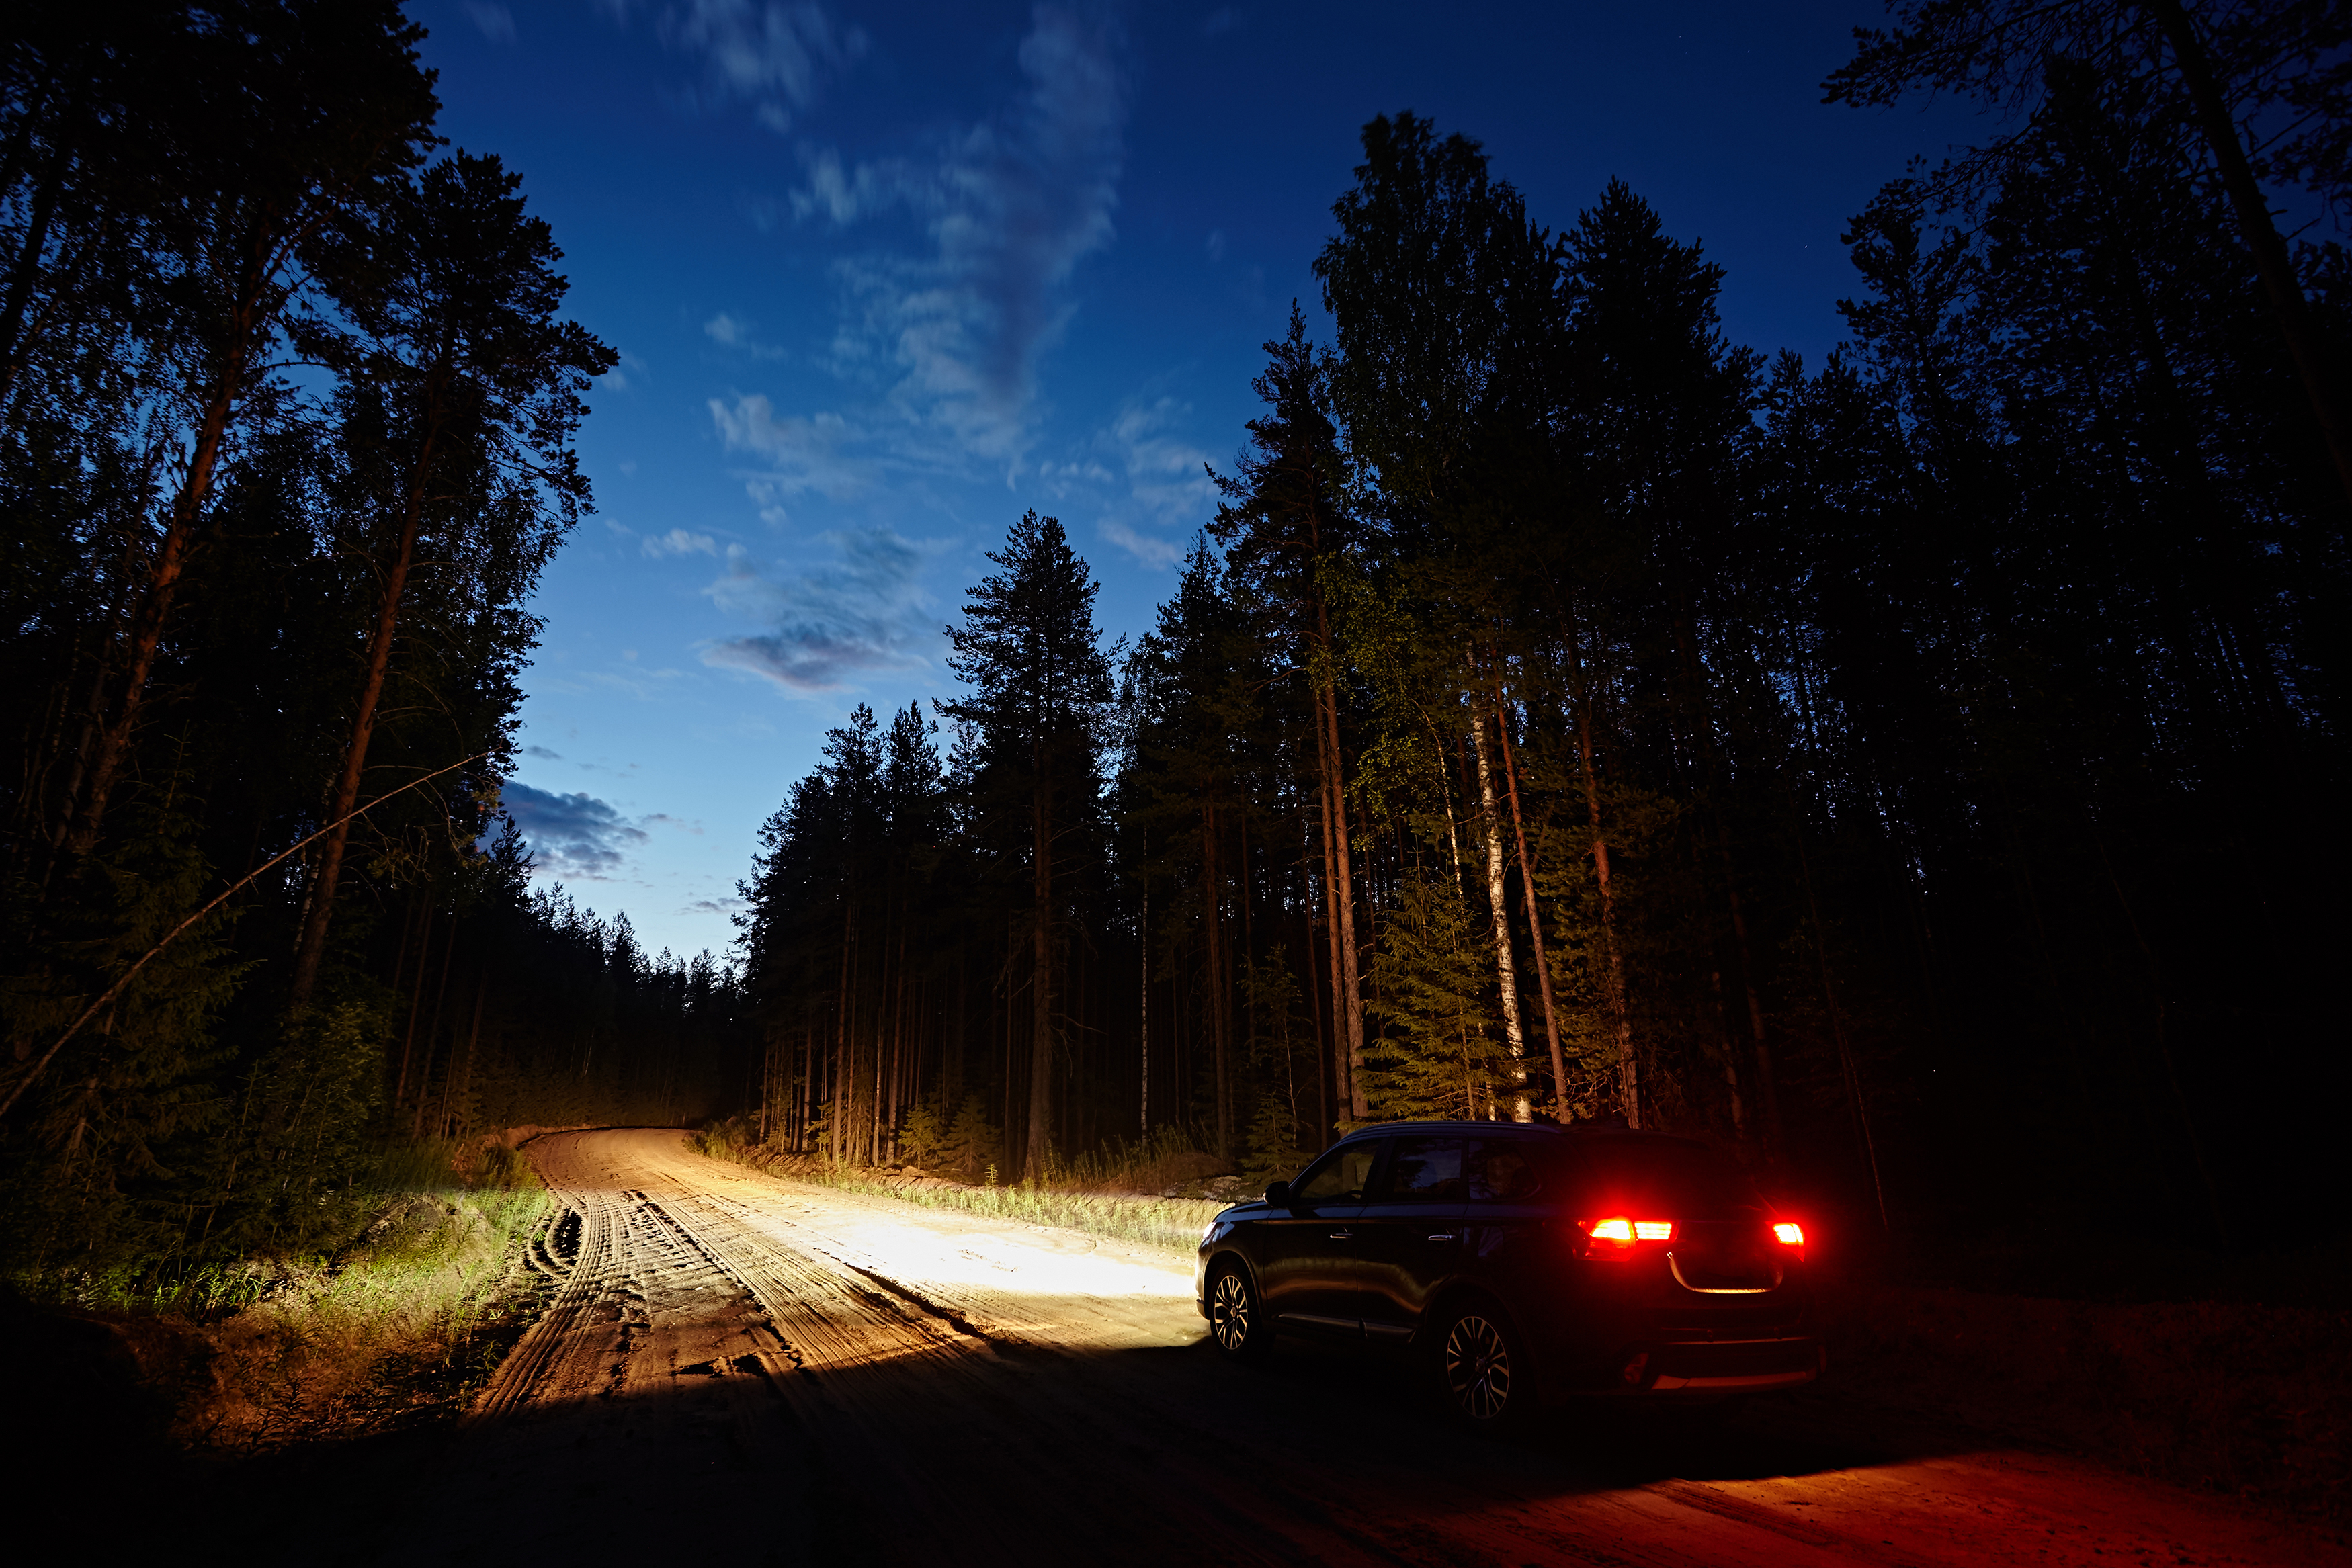 The car drives along a dirt road in the woods. | Source: Shutterstock